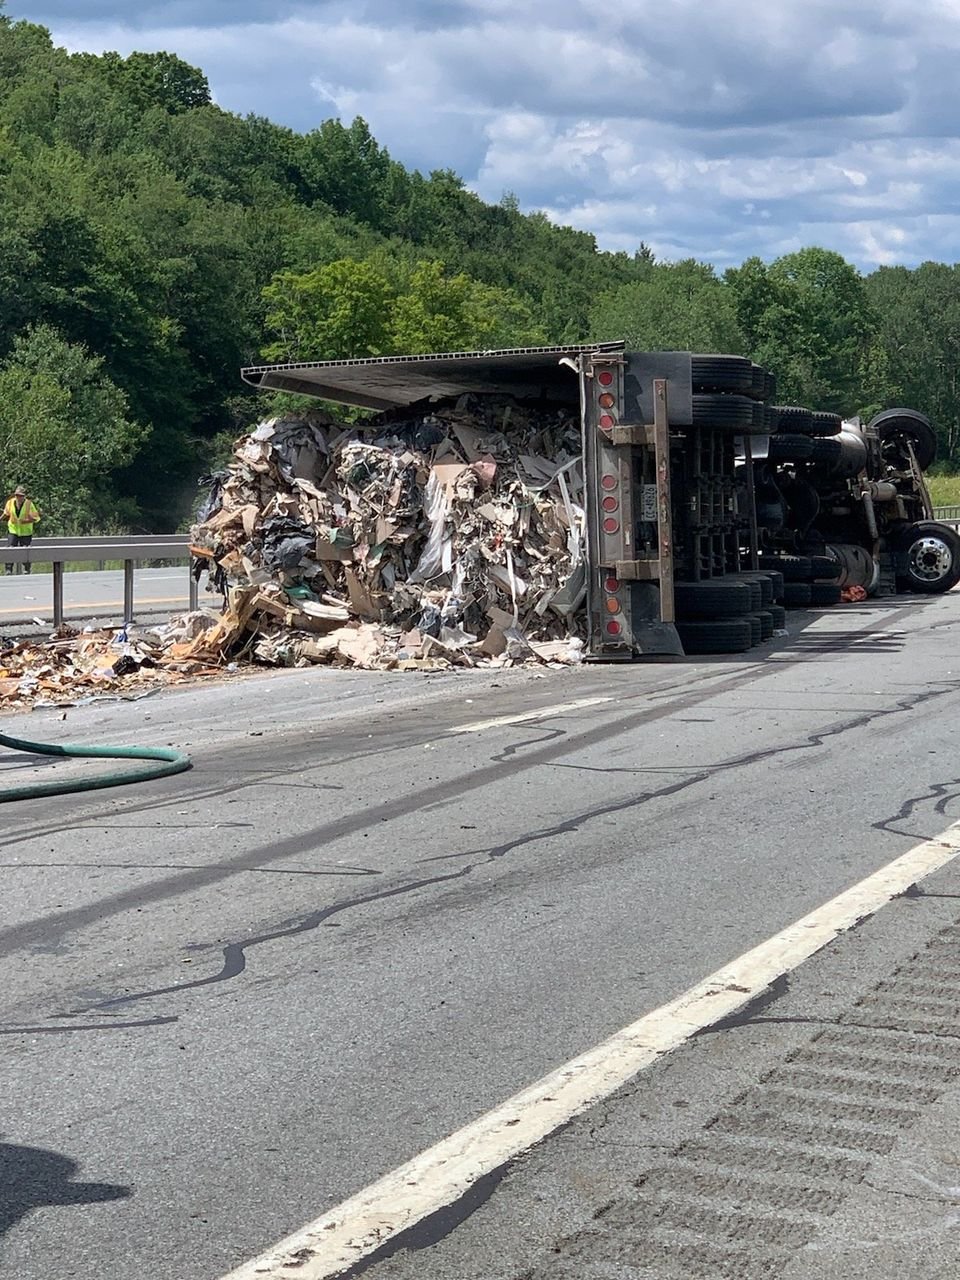 A tractor trailer overturned on State Route 17, causing debris and over 50 gallons of diesel fuel to spill the roadway.